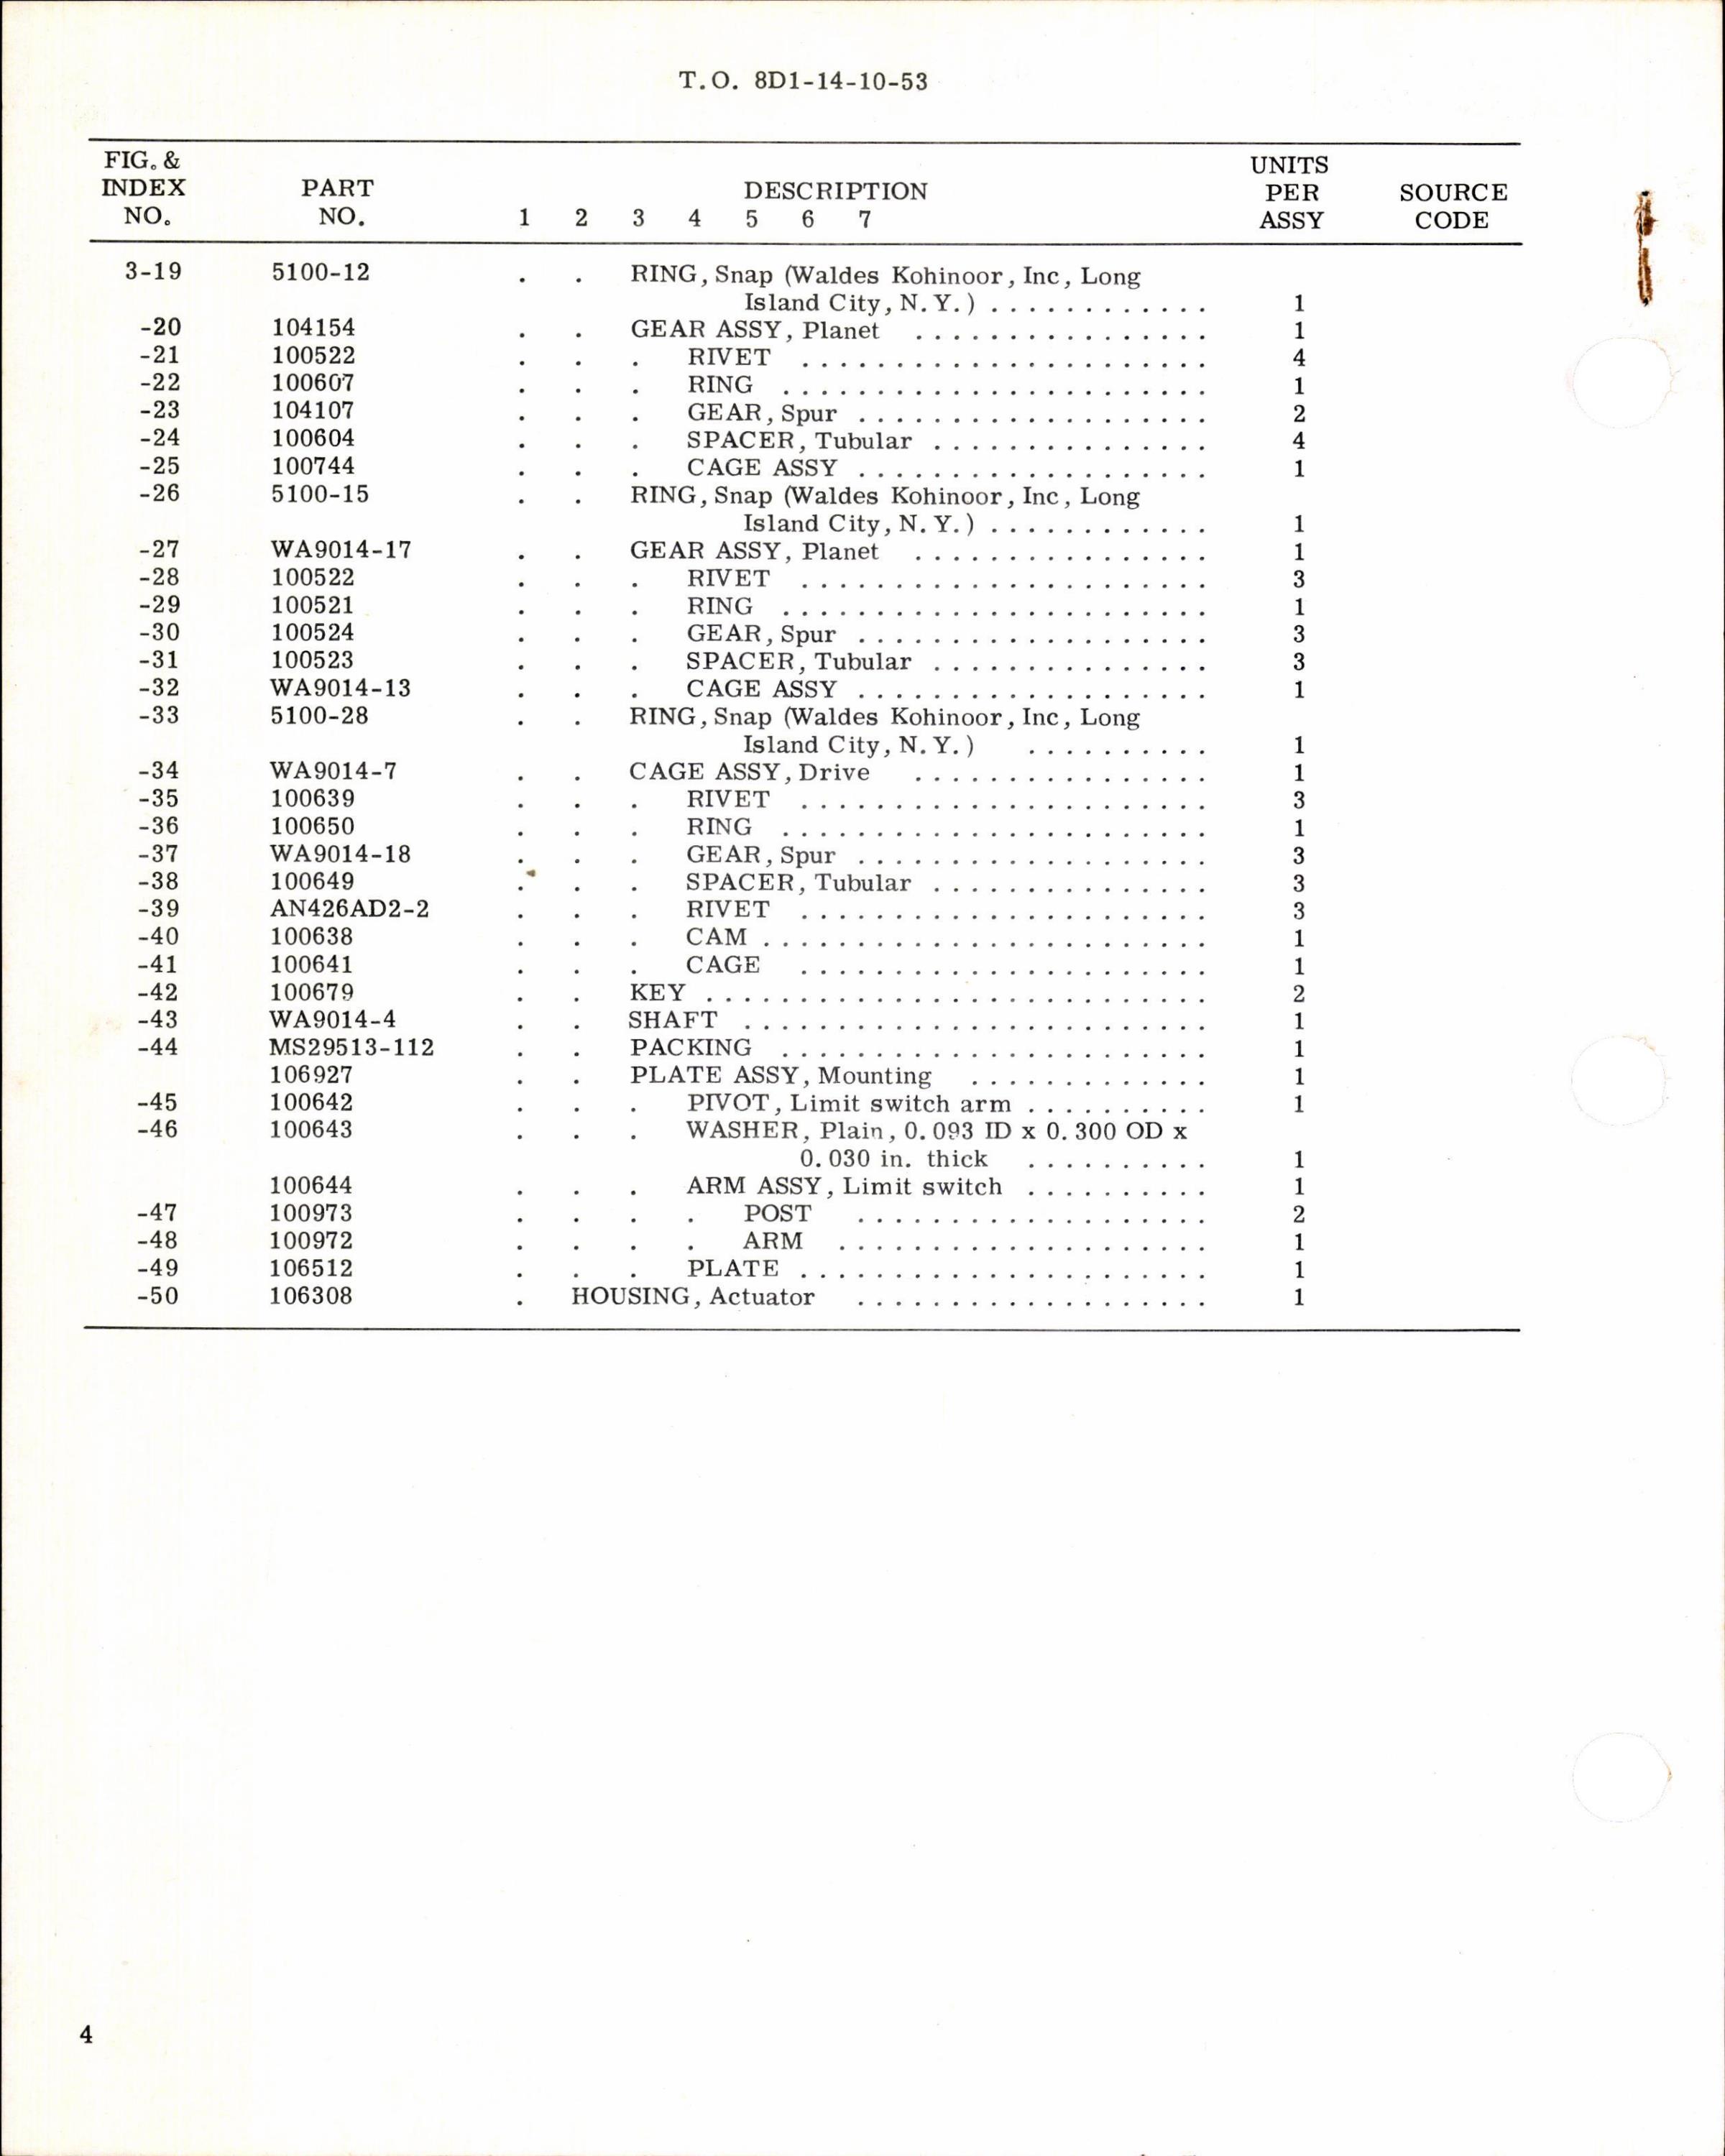 Sample page 4 from AirCorps Library document: Instructions w Parts Breakdown for Actuator Assembly Part 106520